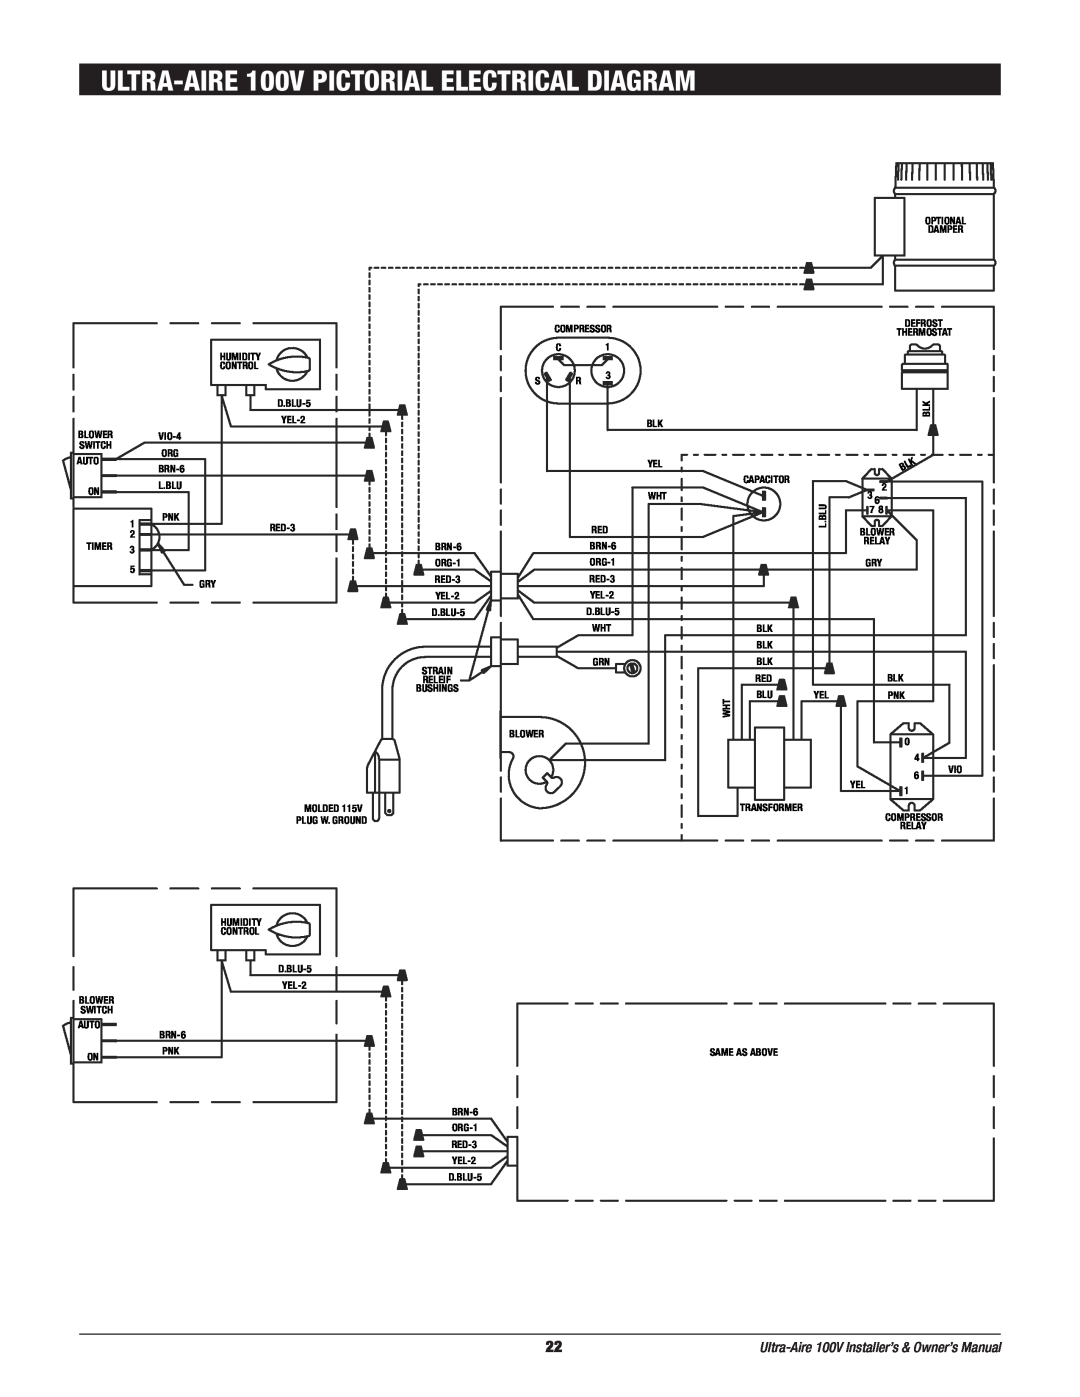 Therma-Stor Products Group Ultra-Aire 100V owner manual ULTRA-AIRE100V PICTORIAL ELECTRICAL DIAGRAM 